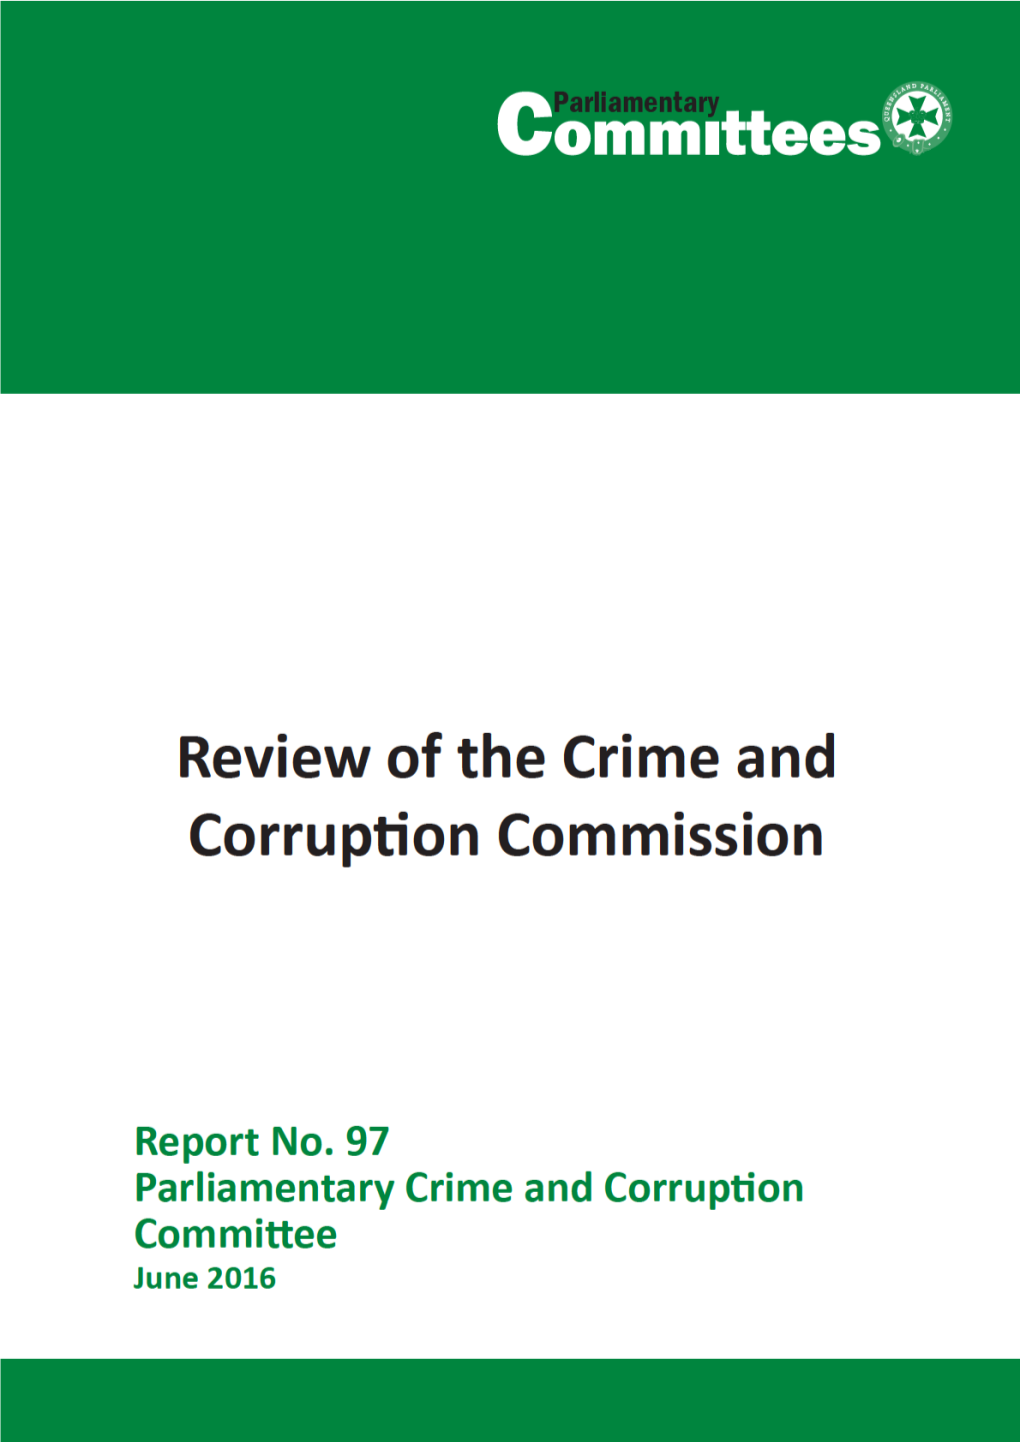 Review of the Crime and Corruption Commission